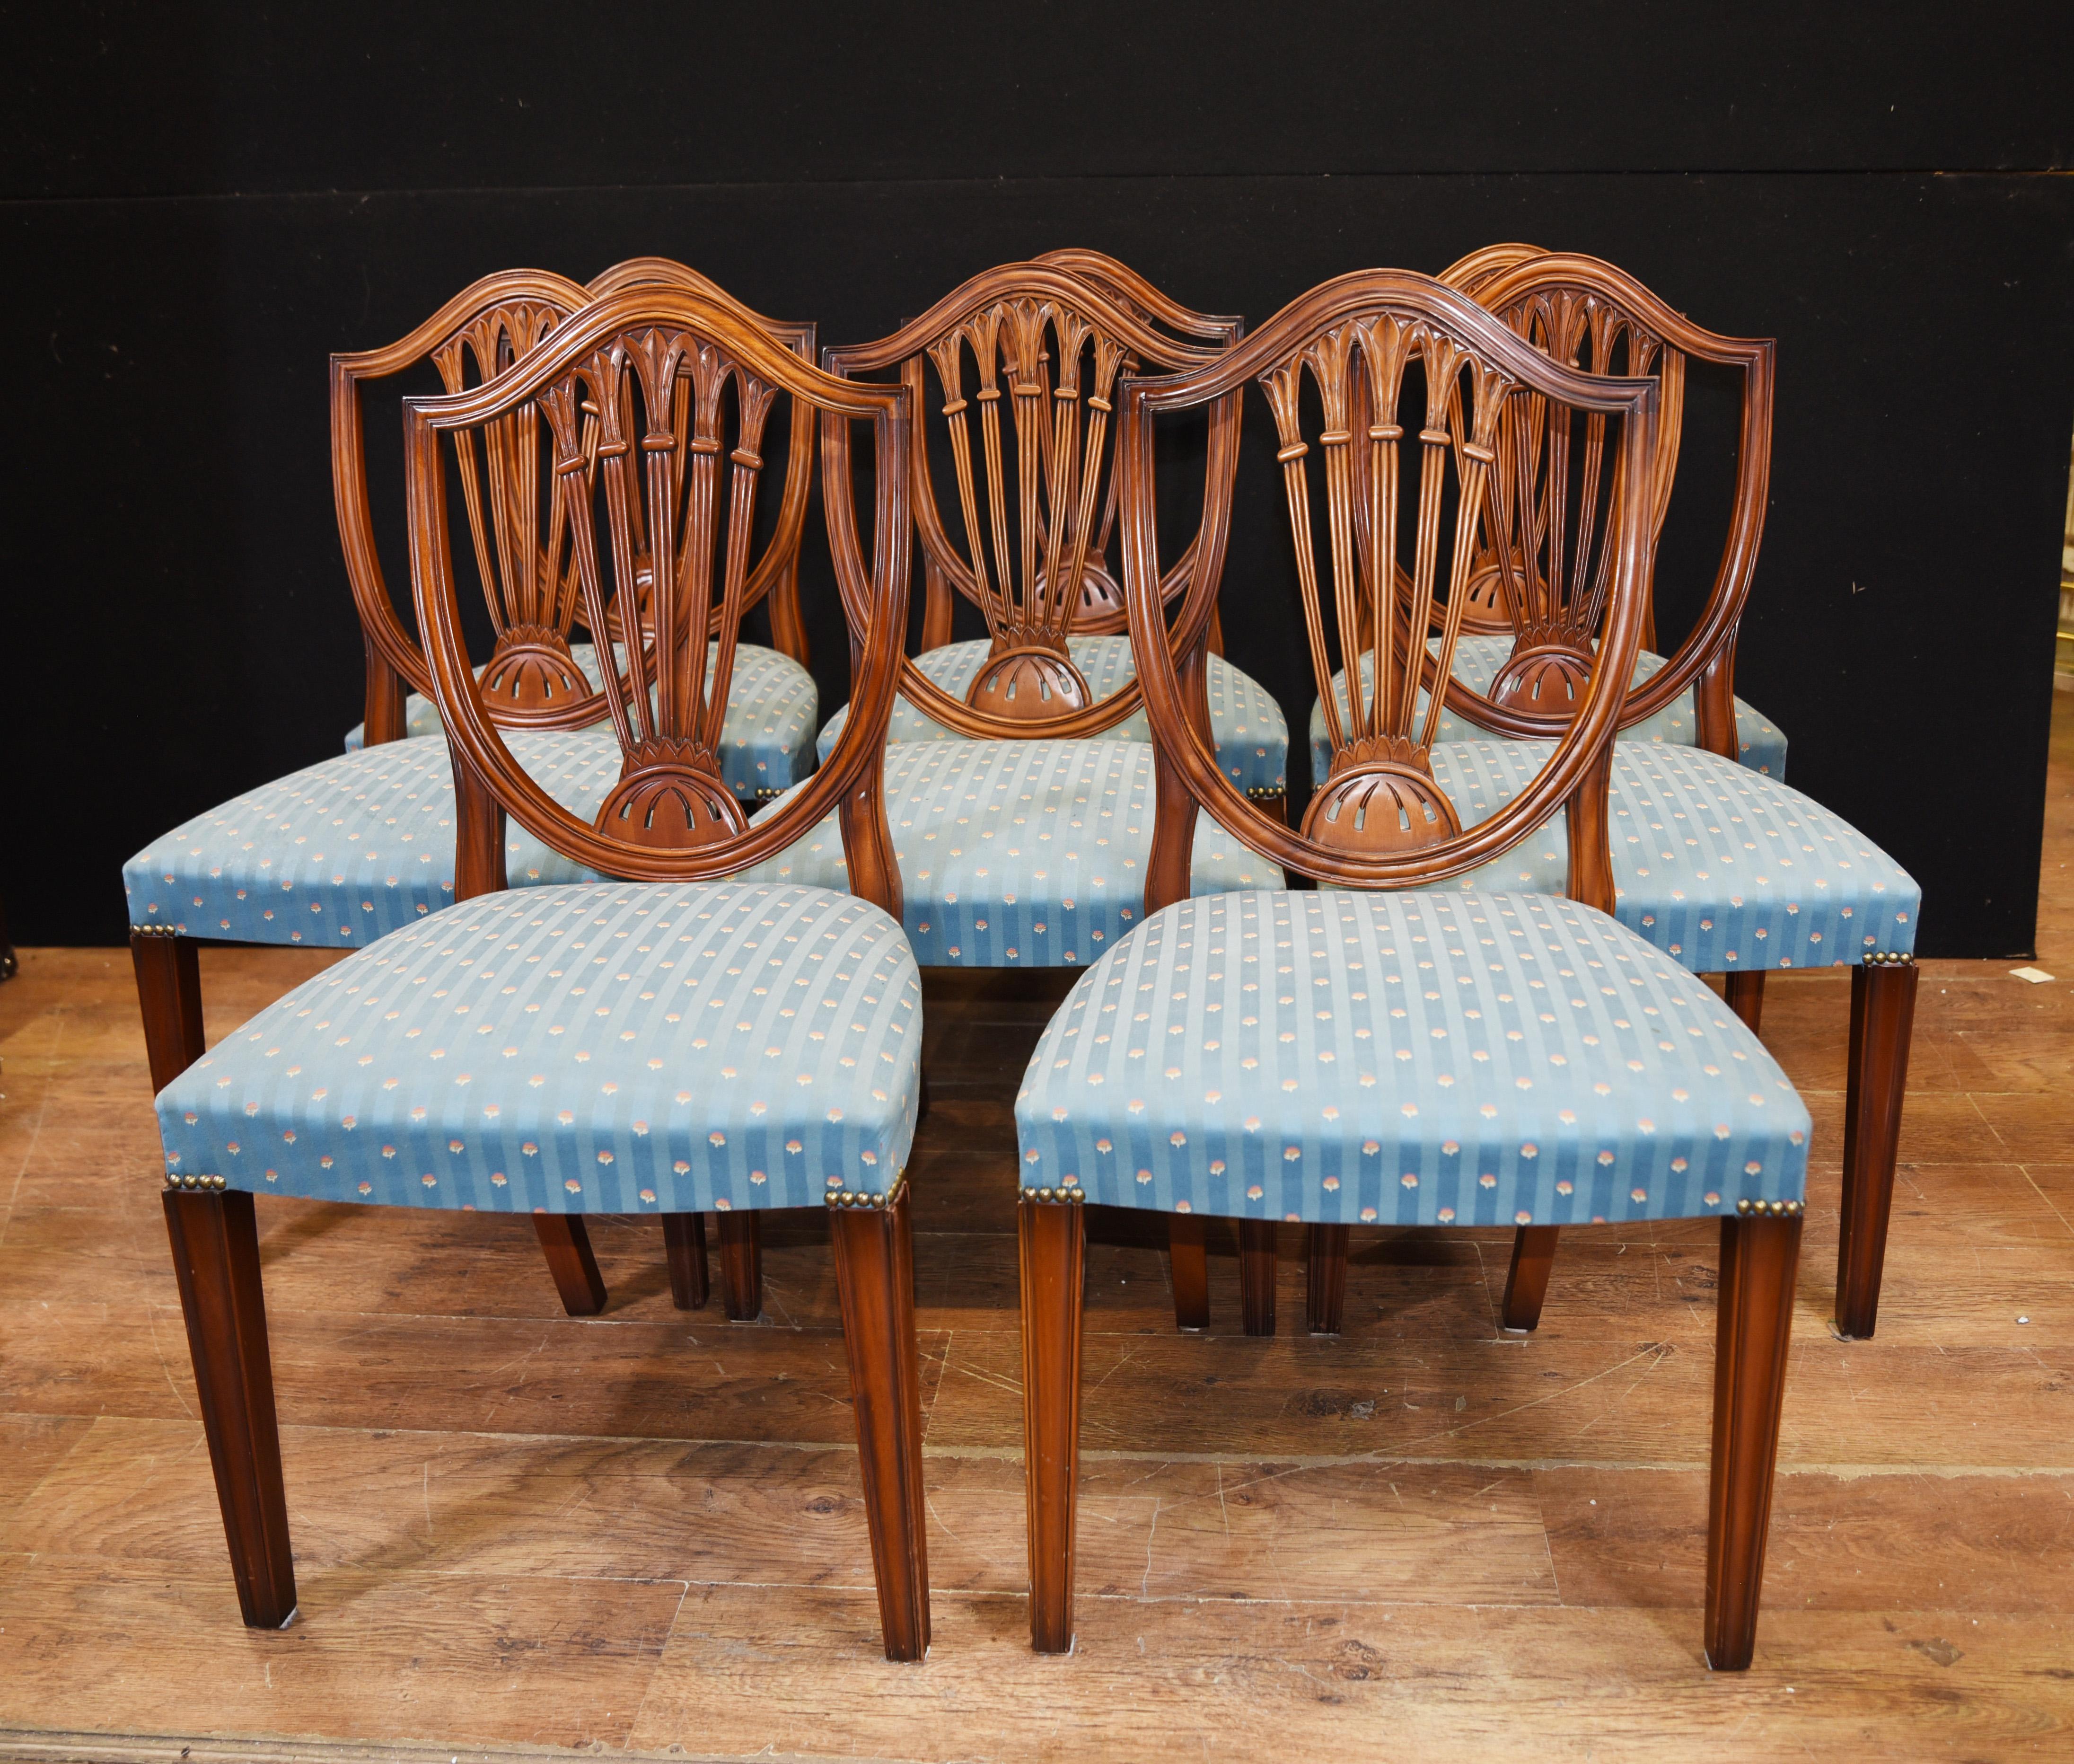 - Gorgeous pair of Hepplewhite style antique dining chairs
- Handsome set with classic Hepplewhite backsplat
- We have various dining tables to match if you are looking for a complete set
- Viewings available by appointment
- Offered in great